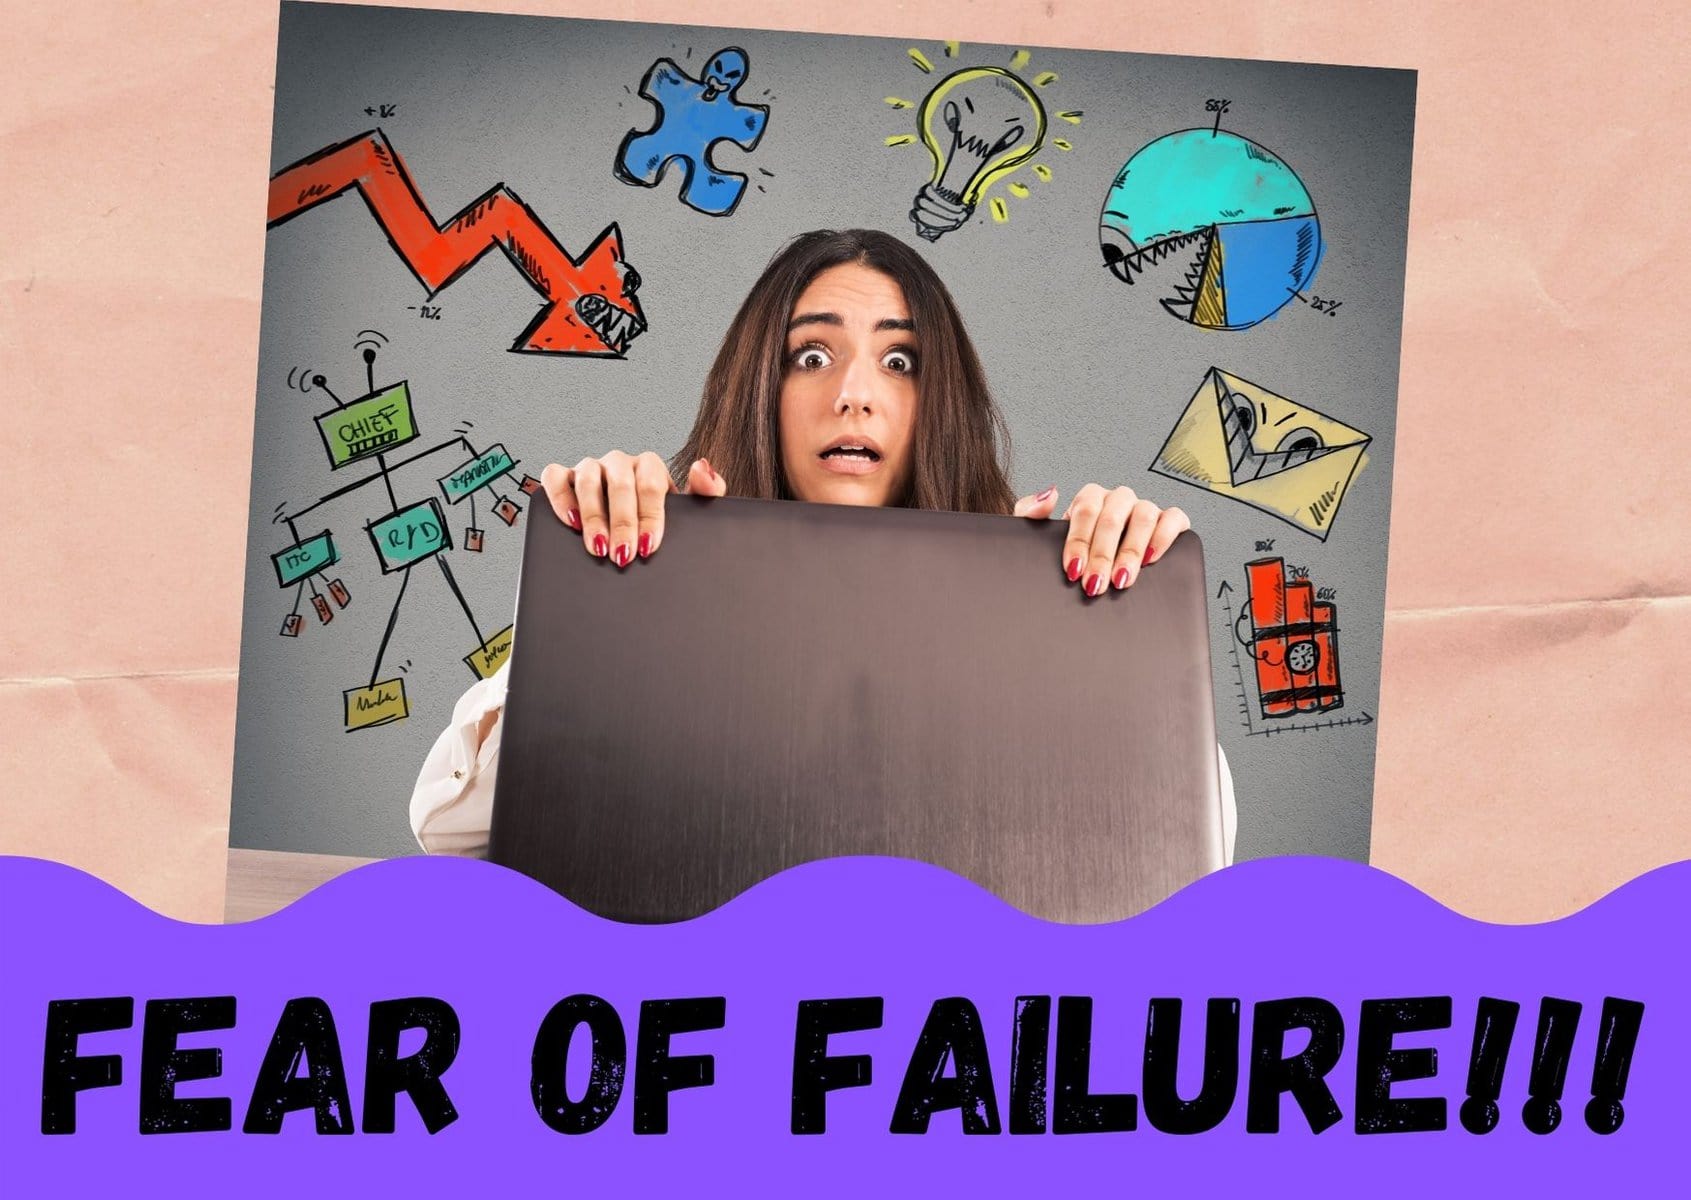 Reasons For Exam Anxiety - Fear of Failure